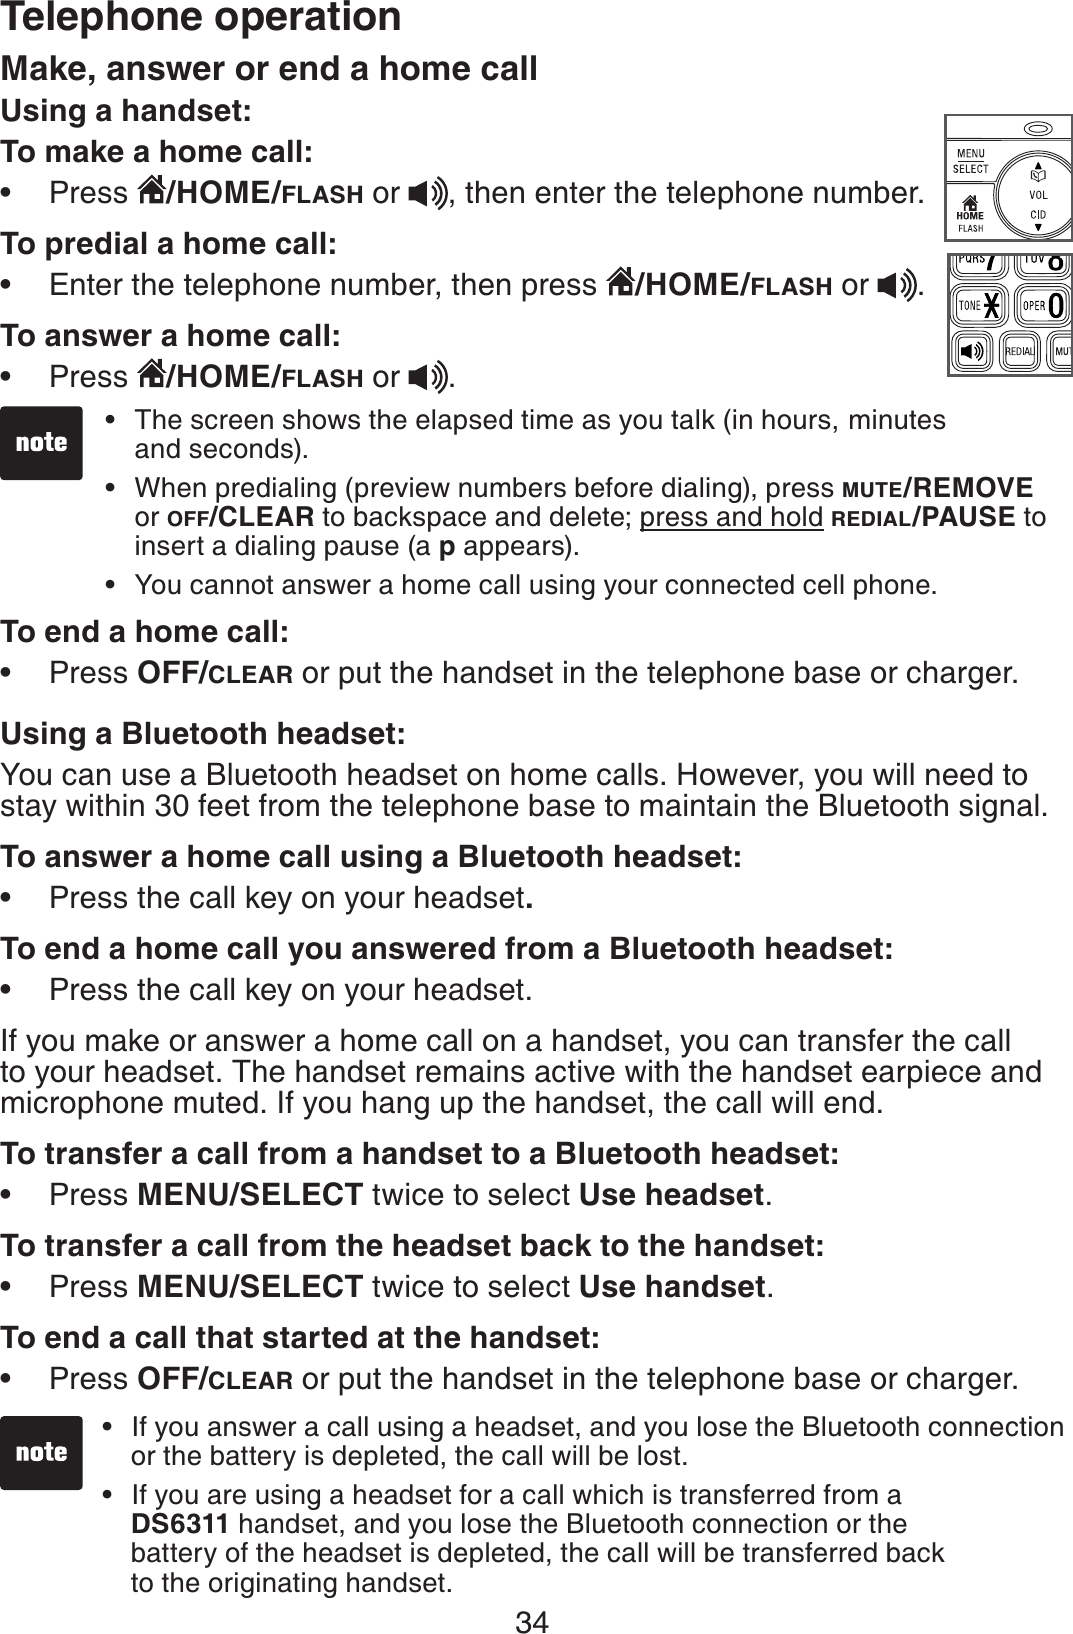 34Make, answer or end a home call Using a handset:To make a home call:Press  /HOME/FLASH or  , then enter the telephone number.To predial a home call:Enter the telephone number, then press  /HOME/FLASH or  .To answer a home call:Press  /HOME/FLASH or  .To end a home call:Press OFF/CLEAR or put the handset in the telephone base or charger.Using a Bluetooth headset:You can use a Bluetooth headset on home calls. However, you will need to stay within 30 feet from the telephone base to maintain the Bluetooth signal.To answer a home call using a Bluetooth headset:Press the call key on your headset.To end a home call you answered from a Bluetooth headset:Press the call key on your headset.If you make or answer a home call on a handset, you can transfer the call to your headset. The handset remains active with the handset earpiece and microphone muted. If you hang up the handset, the call will end.To transfer a call from a handset to a Bluetooth headset:Press MENU/SELECT twice to select Use headset.To transfer a call from the headset back to the handset:Press MENU/SELECT twice to select Use handset.To end a call that started at the handset:Press OFF/CLEAR or put the handset in the telephone base or charger.•••••••••The screen shows the elapsed time as you talk (in hours, minutes and seconds).When predialing (preview numbers before dialing), press MUTE/REMOVEor OFF/CLEAR to backspace and delete; press and hold REDIAL/PAUSE to insert a dialing pause (a p appears).You cannot answer a home call using your connected cell phone.•••If you answer a call using a headset, and you lose the Bluetooth connection or the battery is depleted, the call will be lost.If you are using a headset for a call which is transferred from a    DS6311 handset, and you lose the Bluetooth connection or the    battery of the headset is depleted, the call will be transferred back     to the originating handset. ••Telephone operation